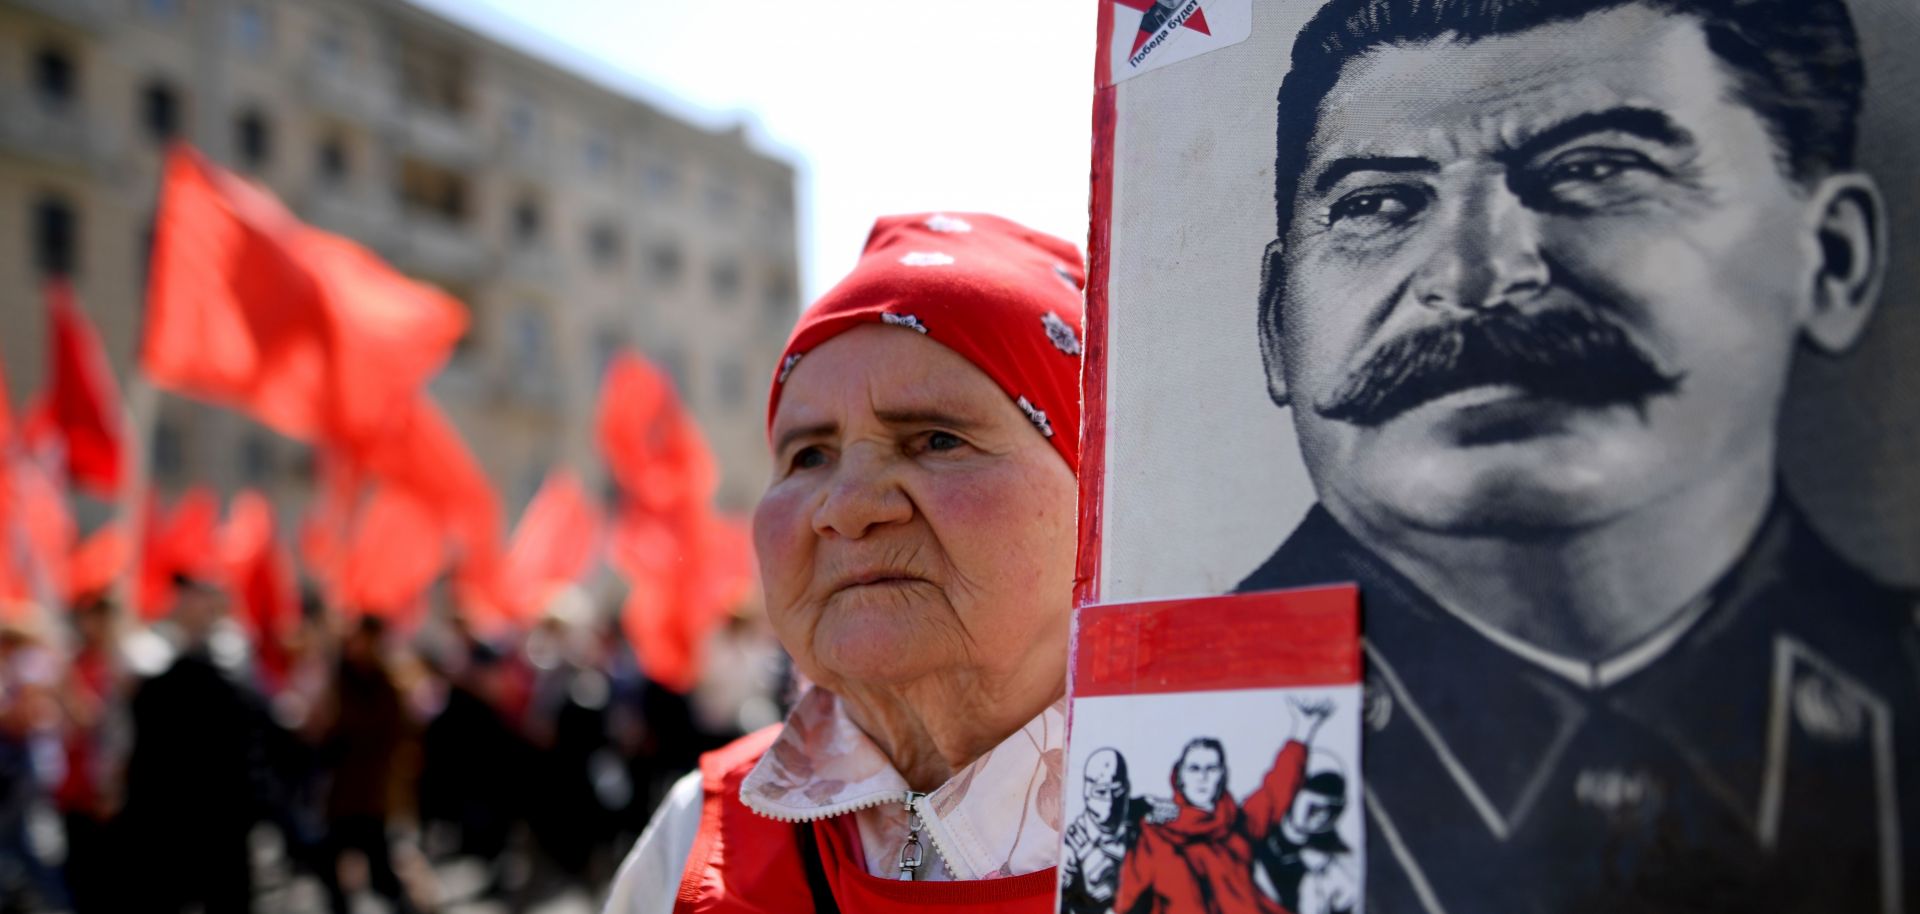 A supporter of Russia's Communist Party brandishes a poster bearing infamous Soviet leader Josef Stalin's likeness during a May Day celebration.